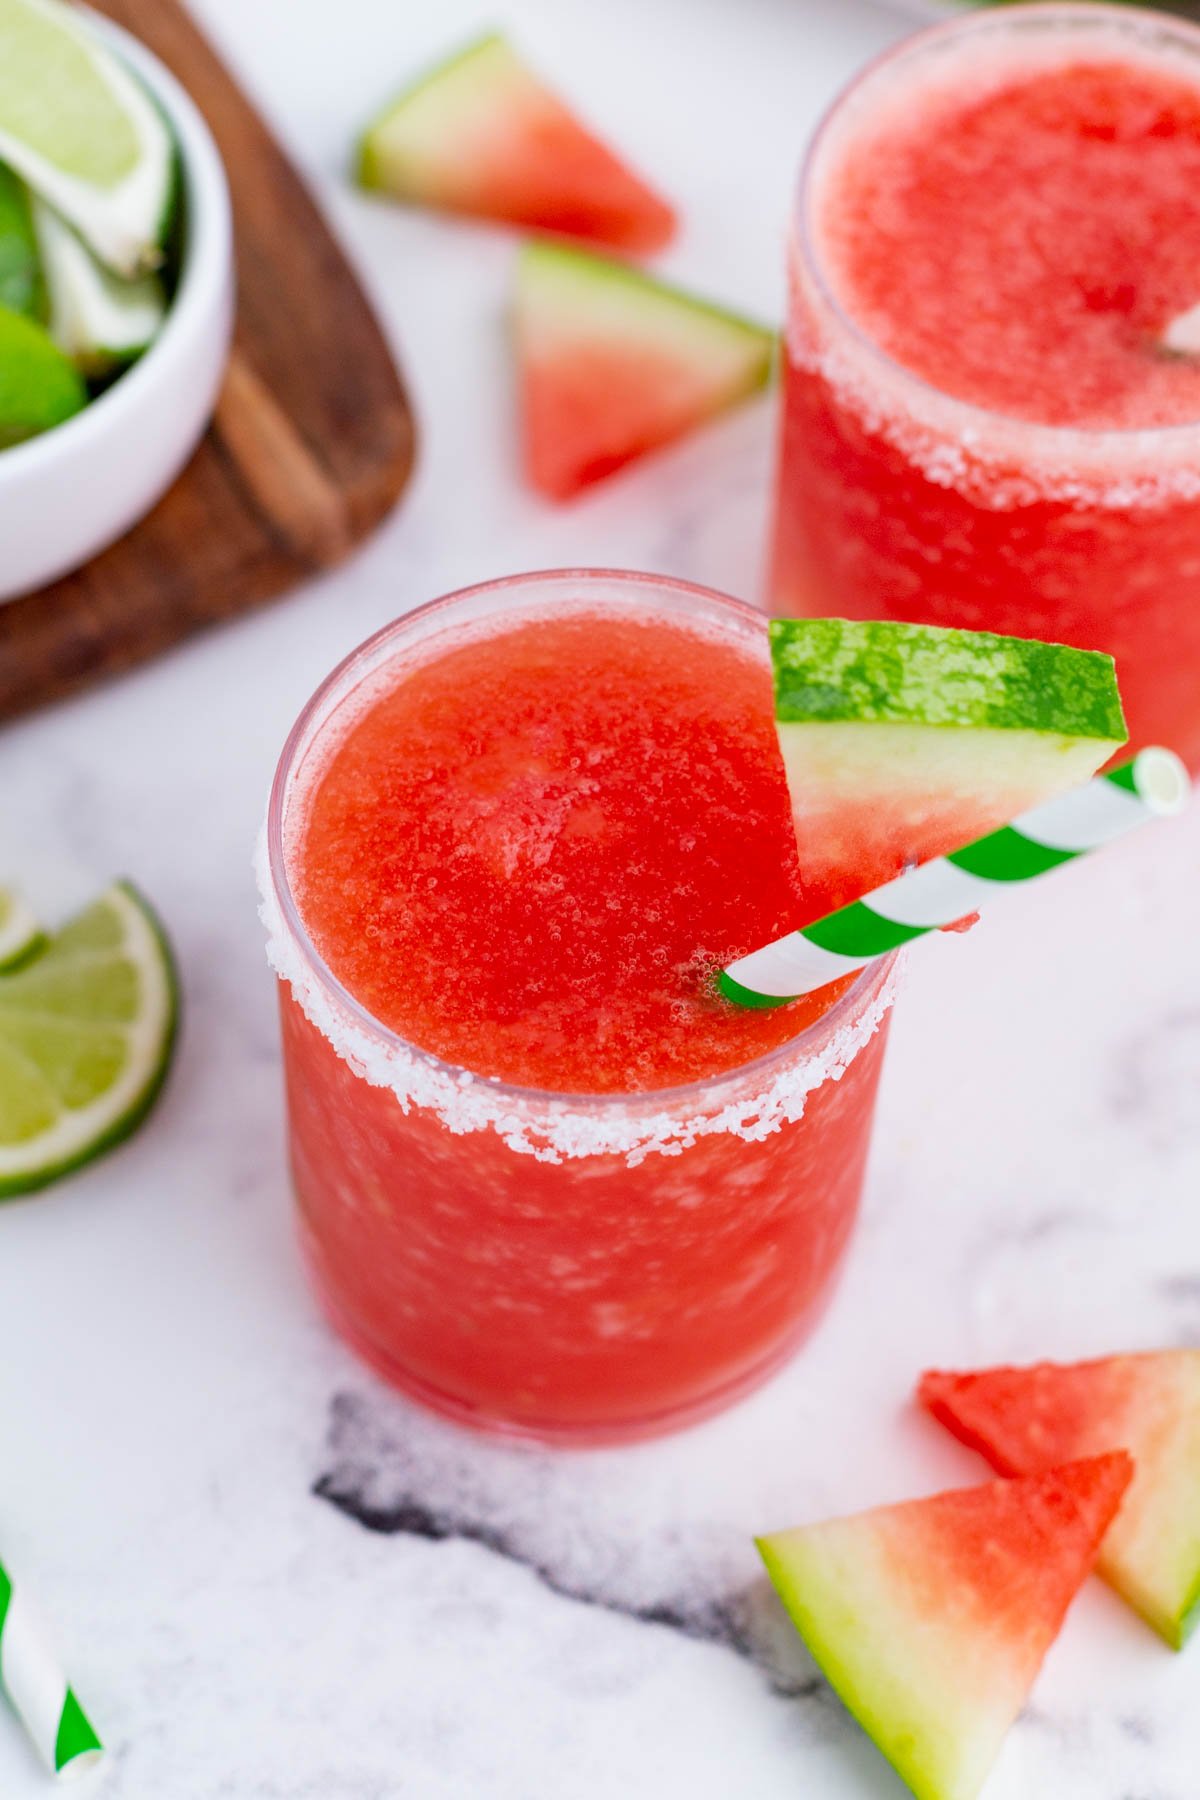 This watermelon margarita is a fresh and flavorful summer drink.